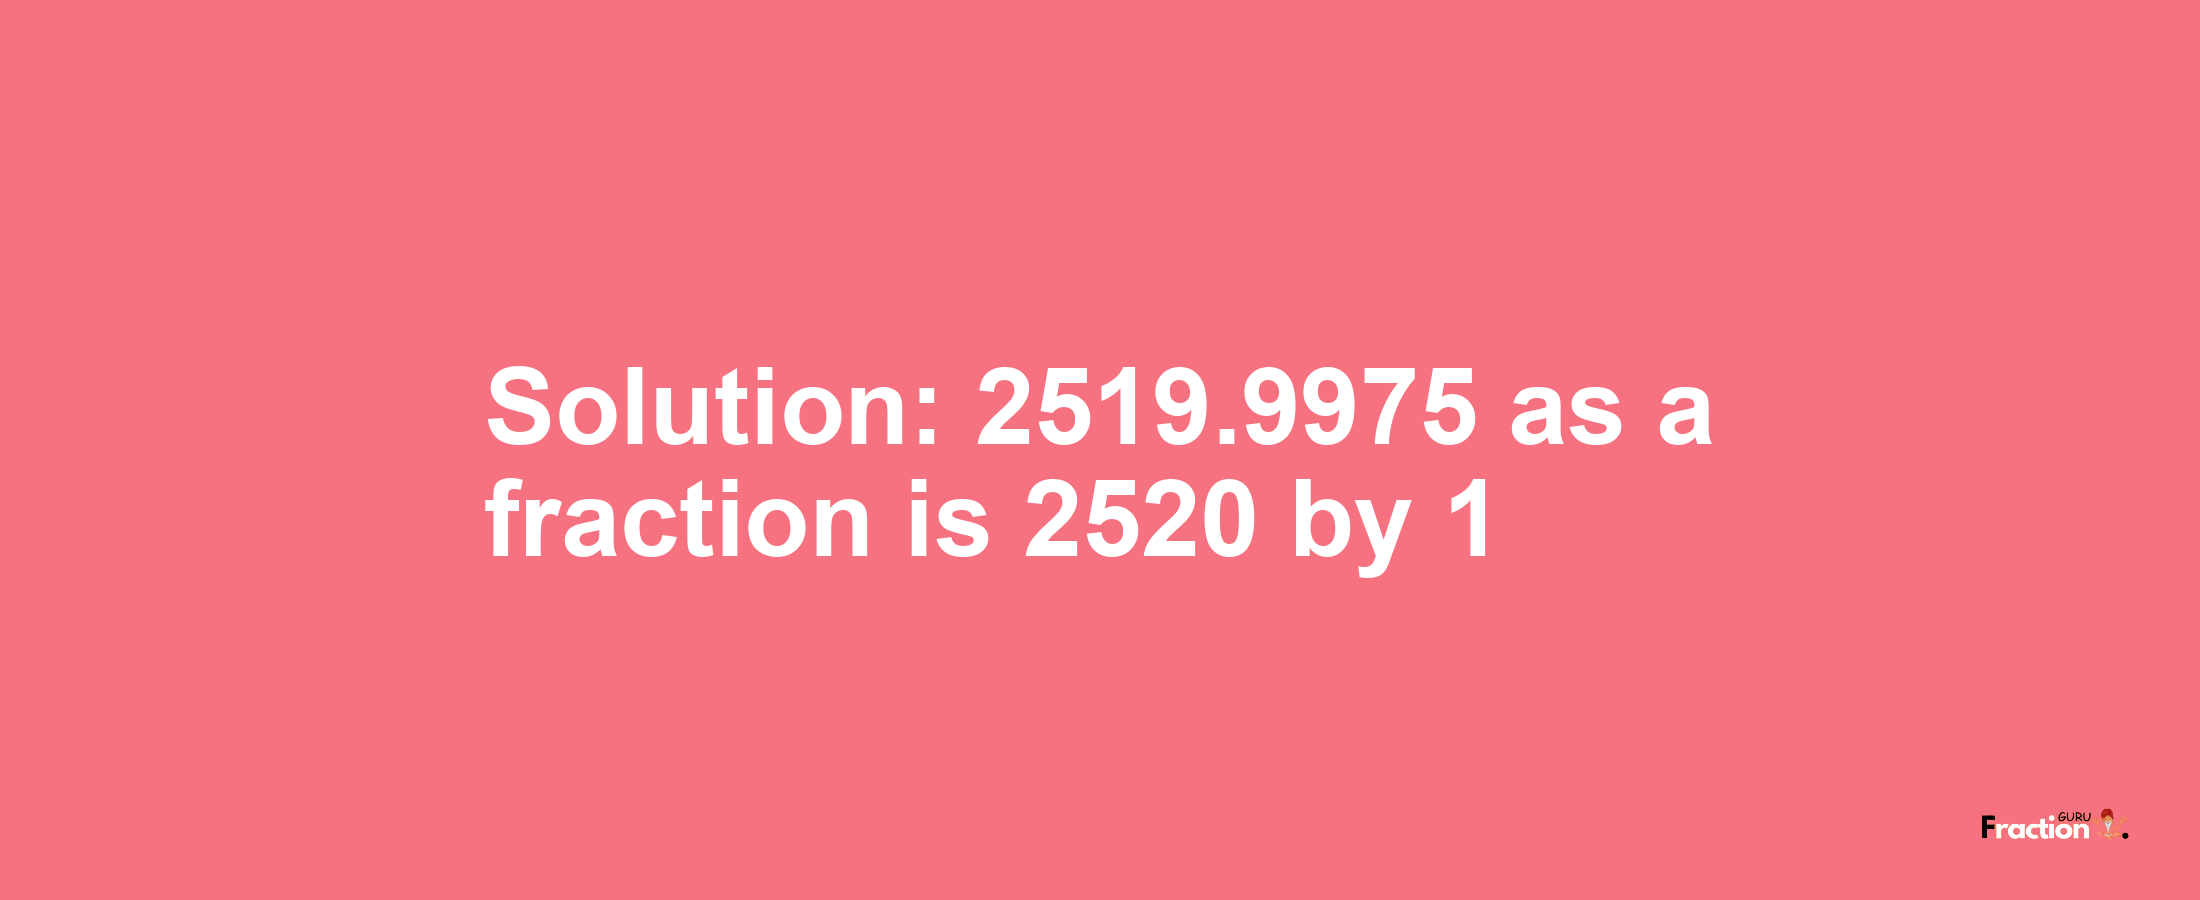 Solution:2519.9975 as a fraction is 2520/1